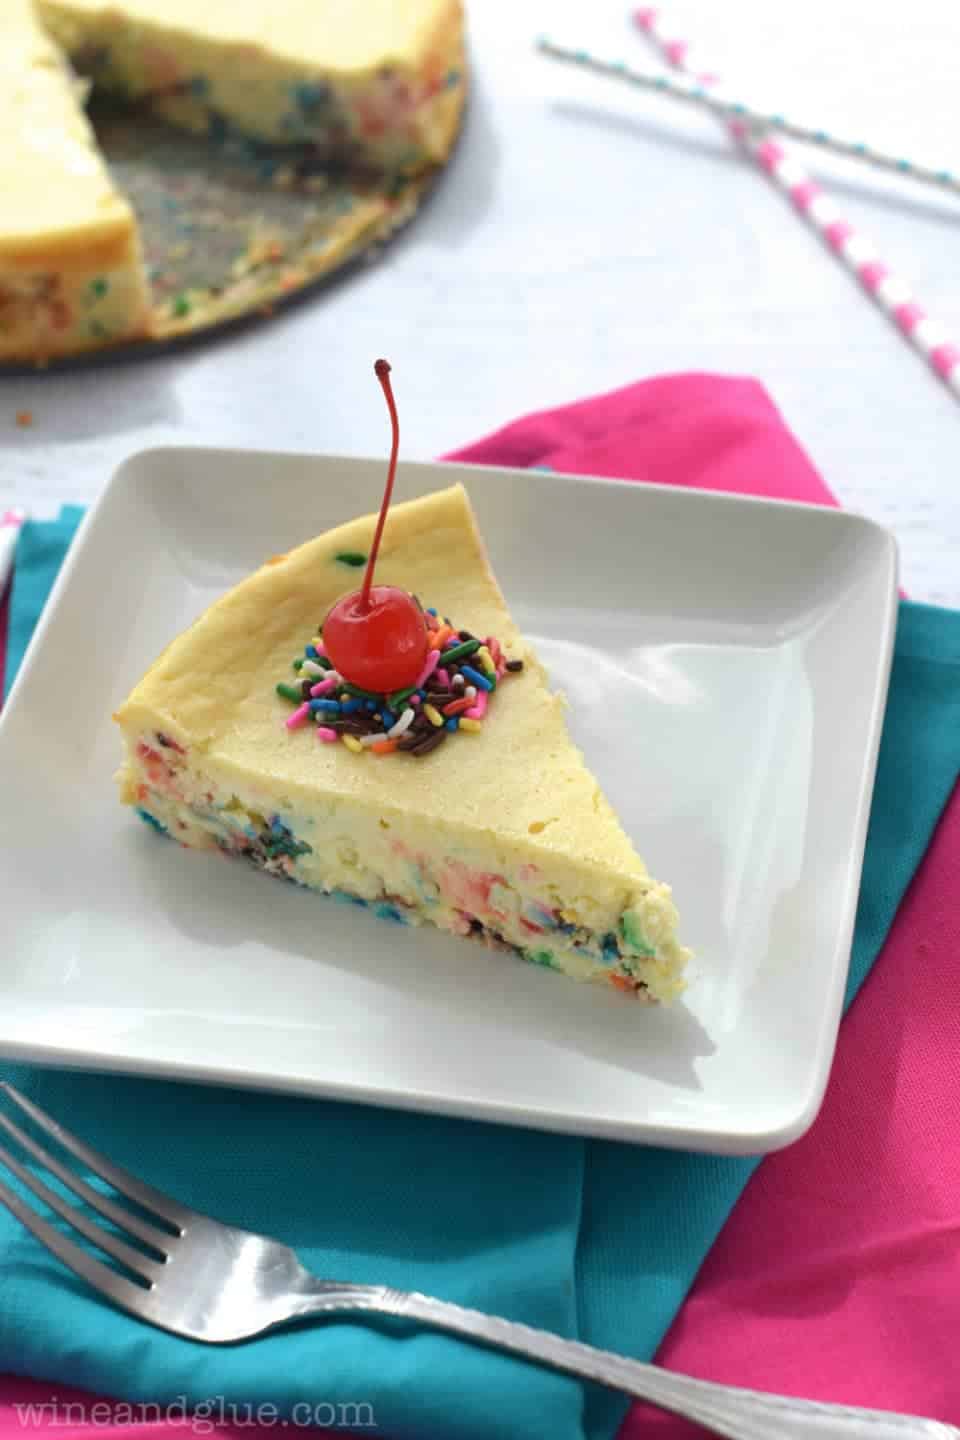 This Cake Batter Cheesecake is almost as good as licking the beaters!